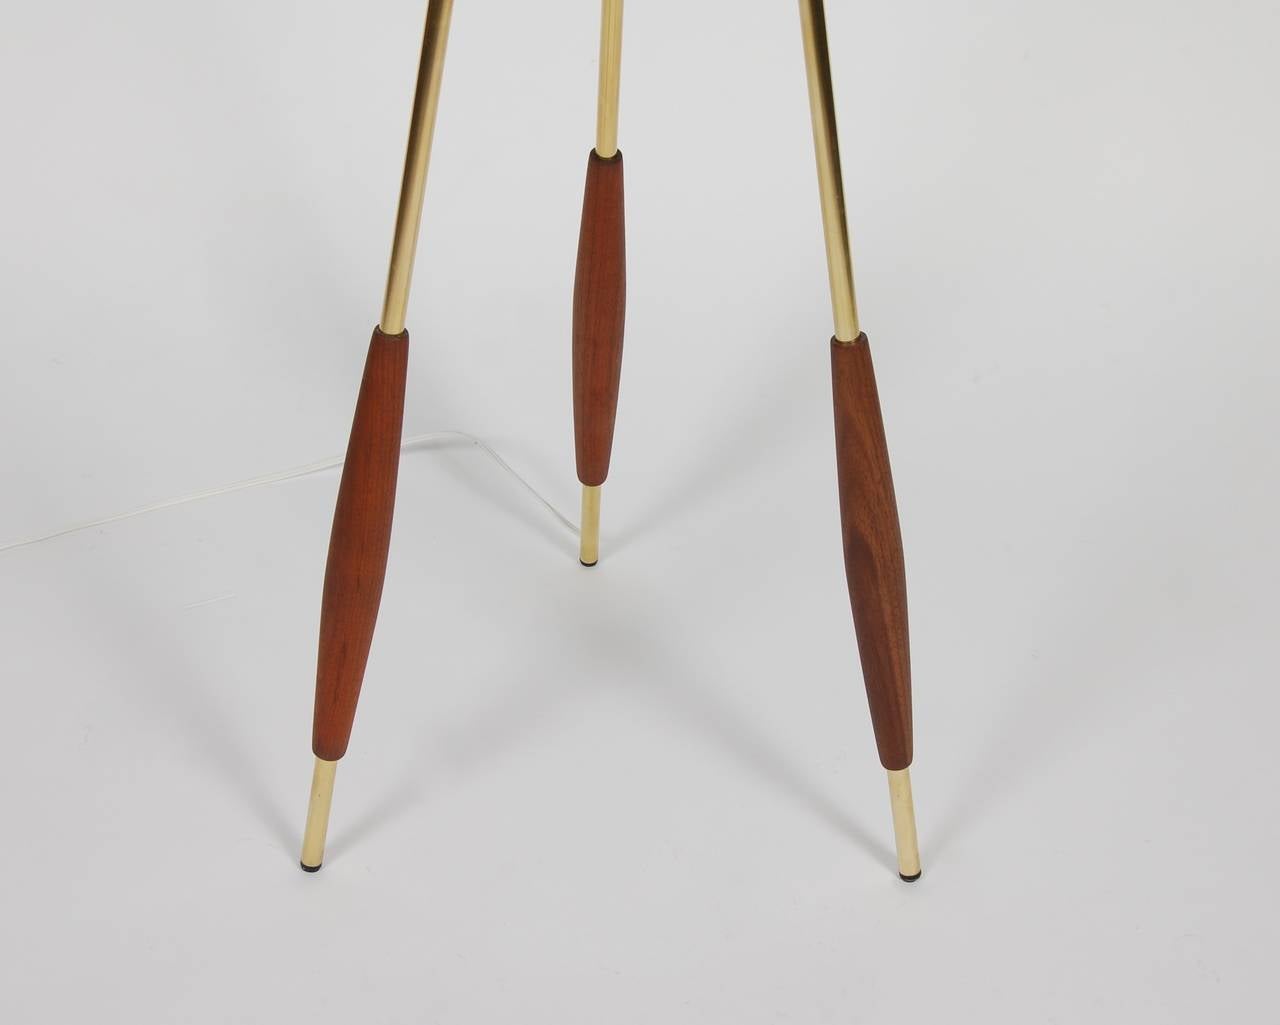 Tripod floor lamp designed by Gerald Thurston for Lightolier, hand polished brass with turned walnut accents at the base of the legs. The shade was custom-made for the lamp and still retains the original metal top diffuser. Newly rewired, the lamp